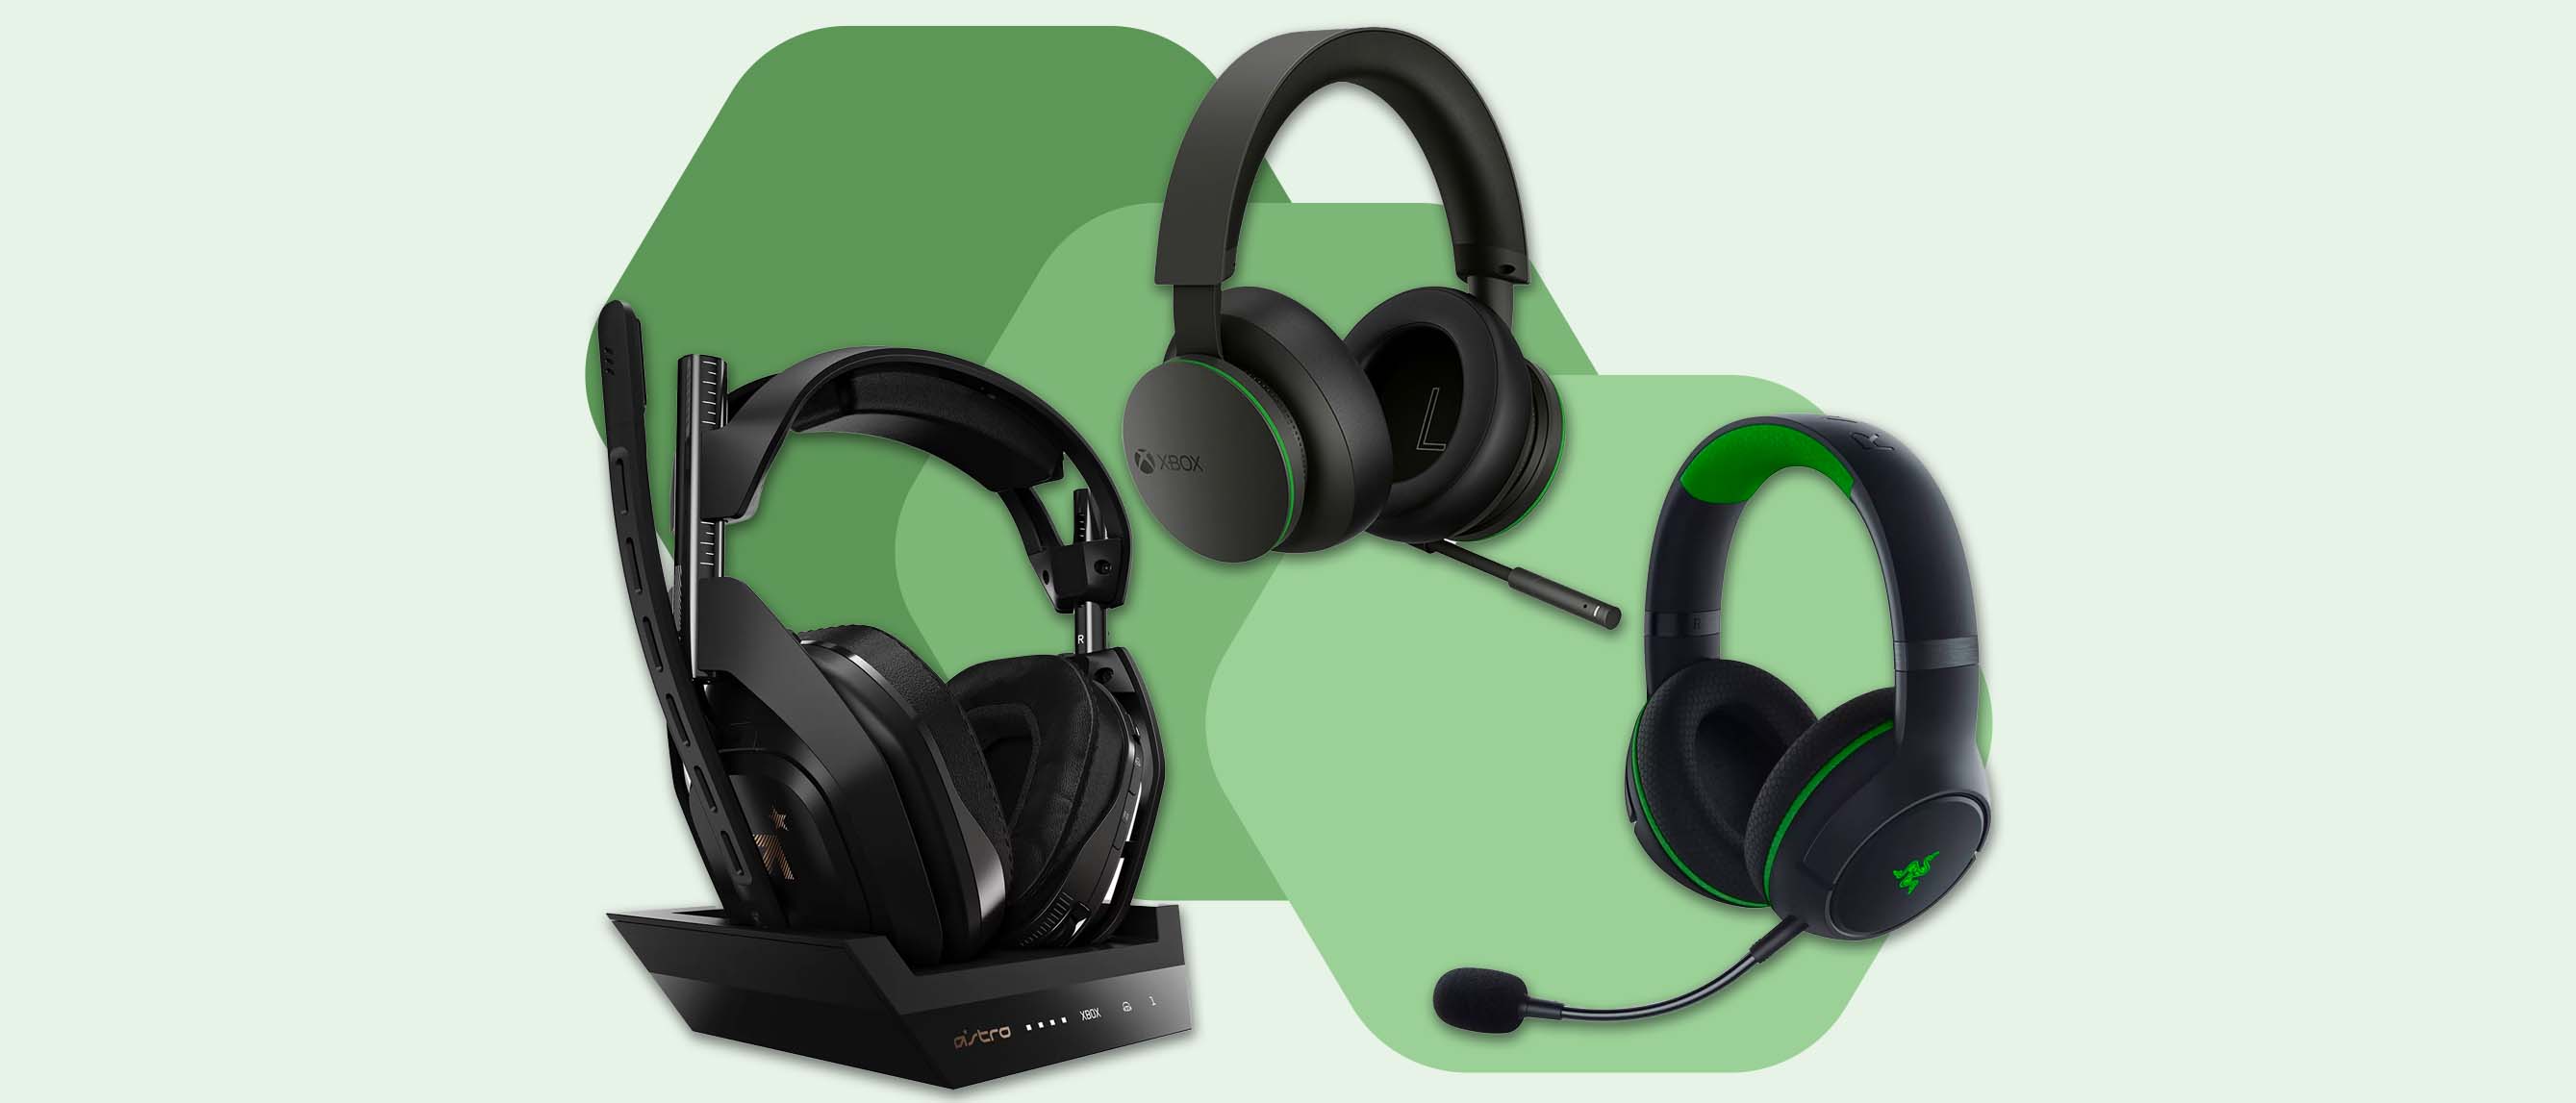 3 pairs of xbox headsets on green background